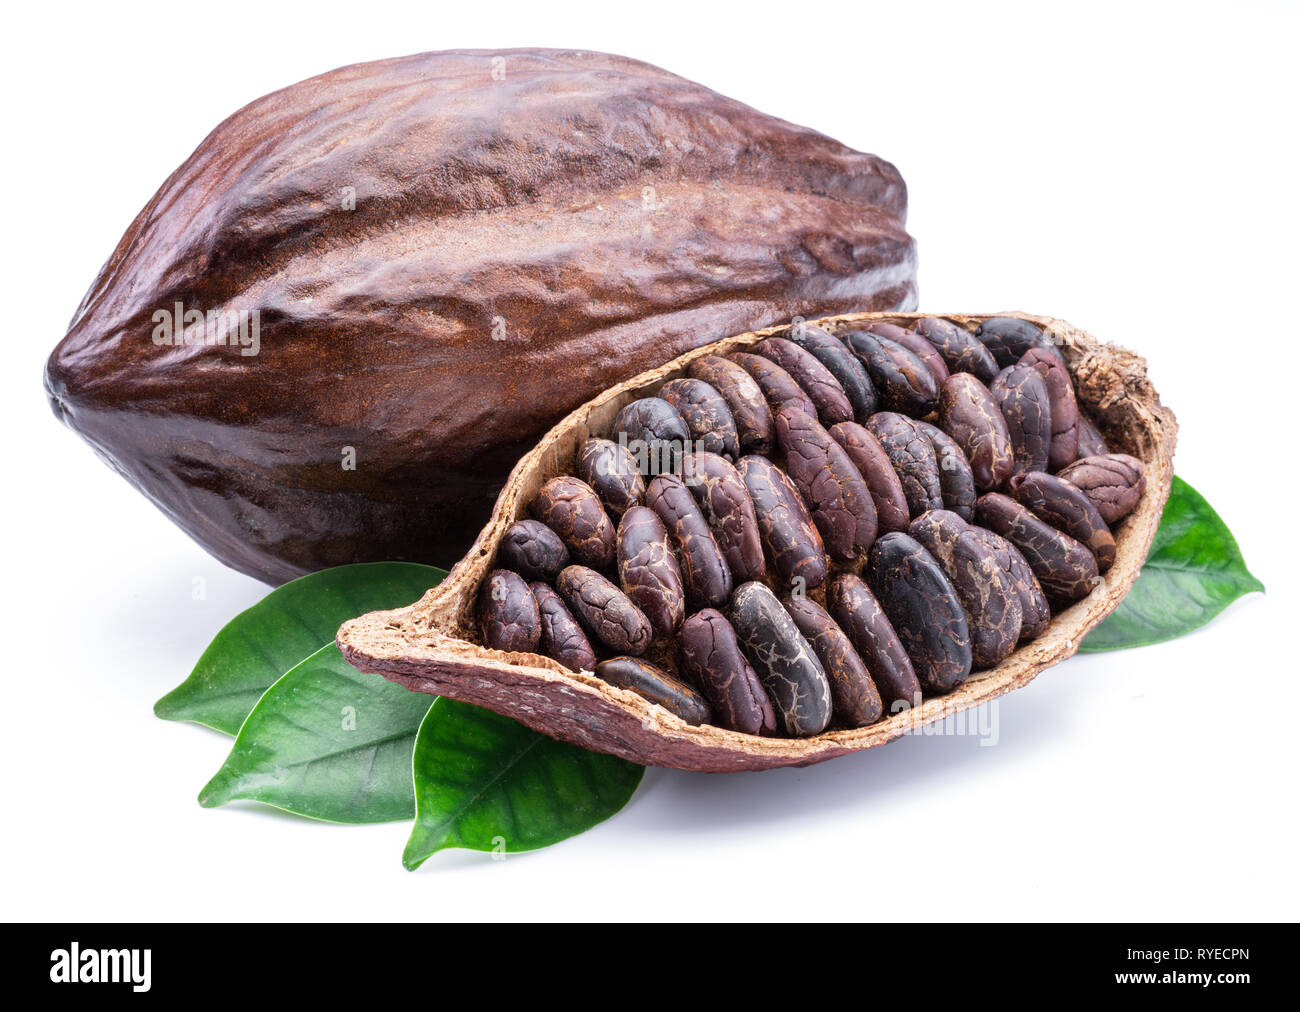 Cocoa pods and cocoa beans -chocolate basis isolated on a white background. Stock Photo